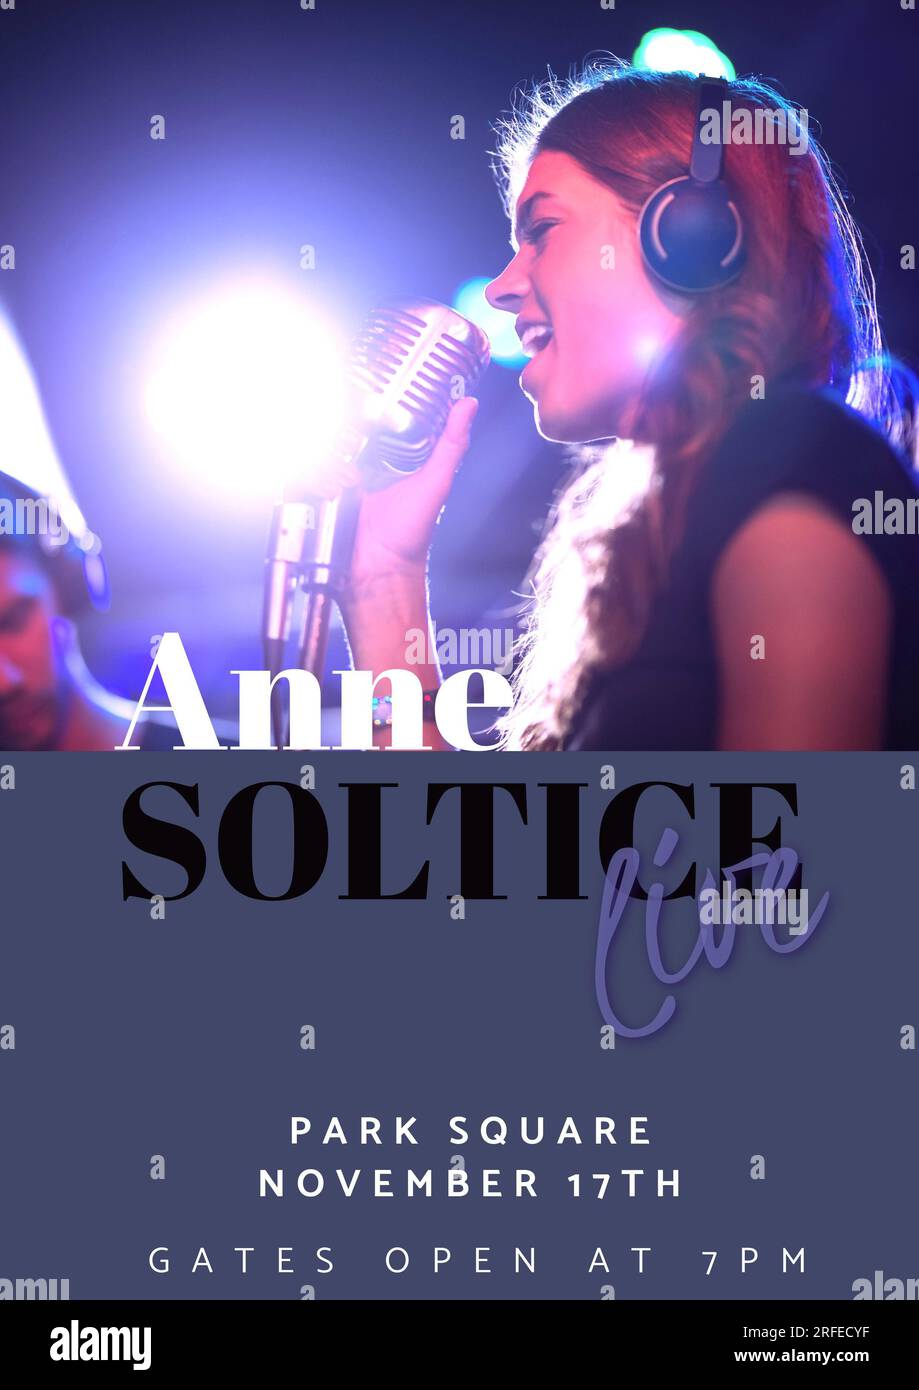 Anne soltice live, park square, november 17th, gates open at 7pm, caucasian woman singing on stage Stock Photo